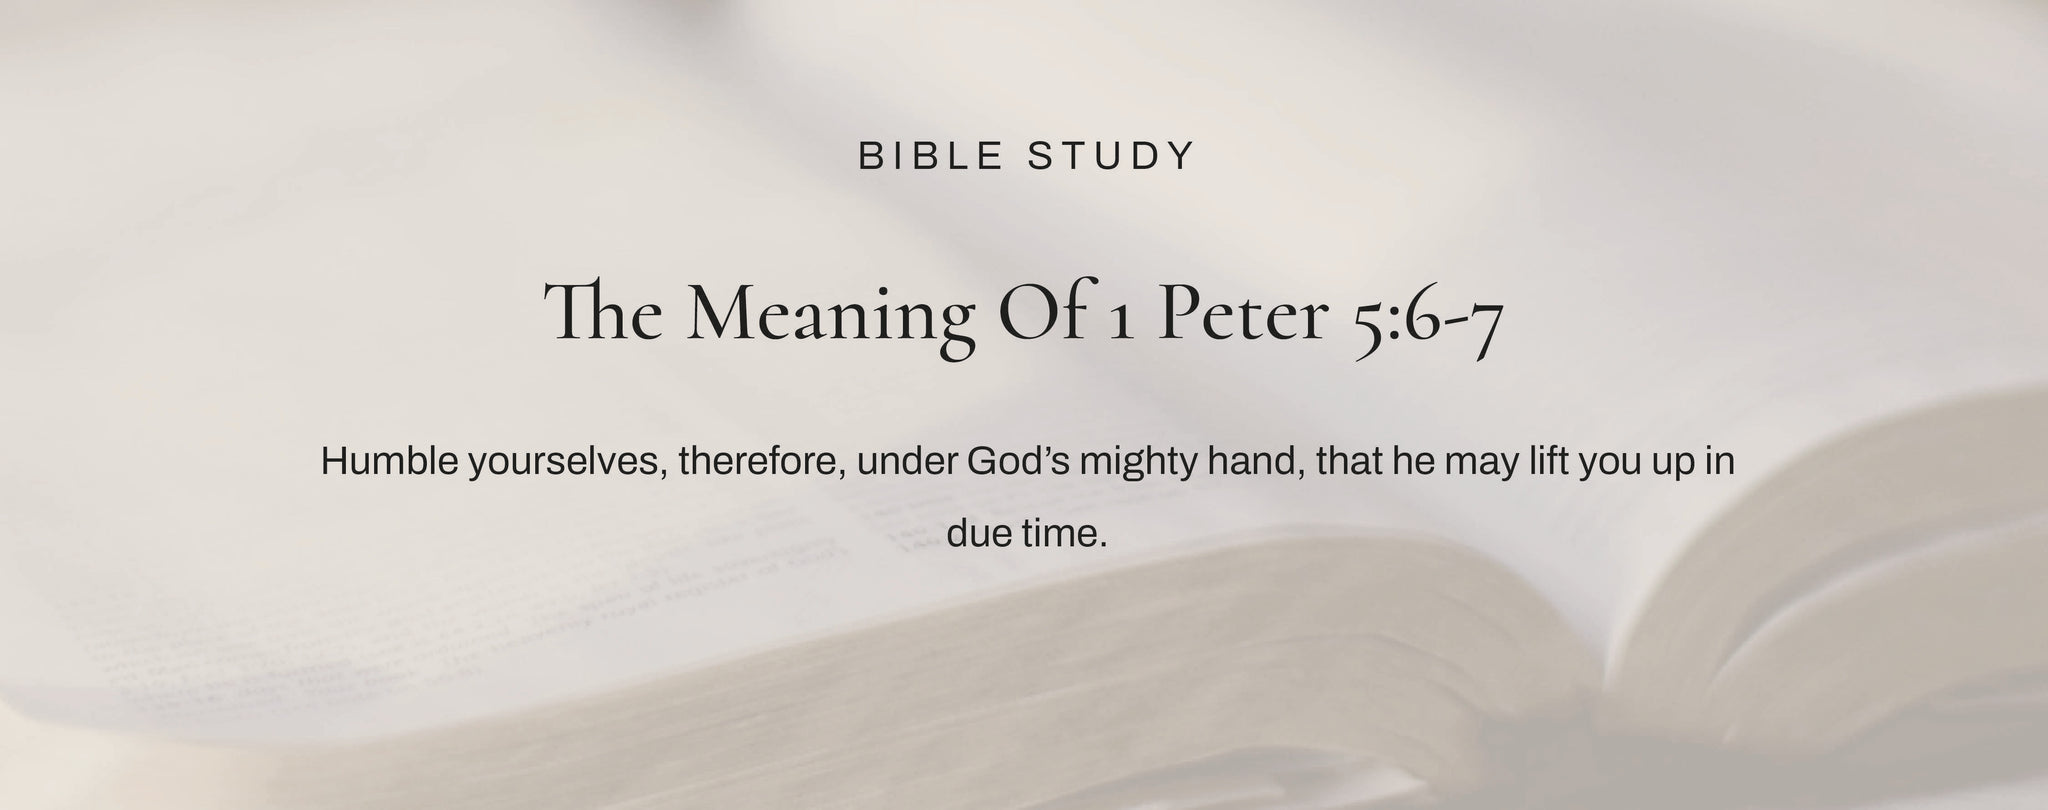 What Does 1 Peter 5:6-7 Mean?